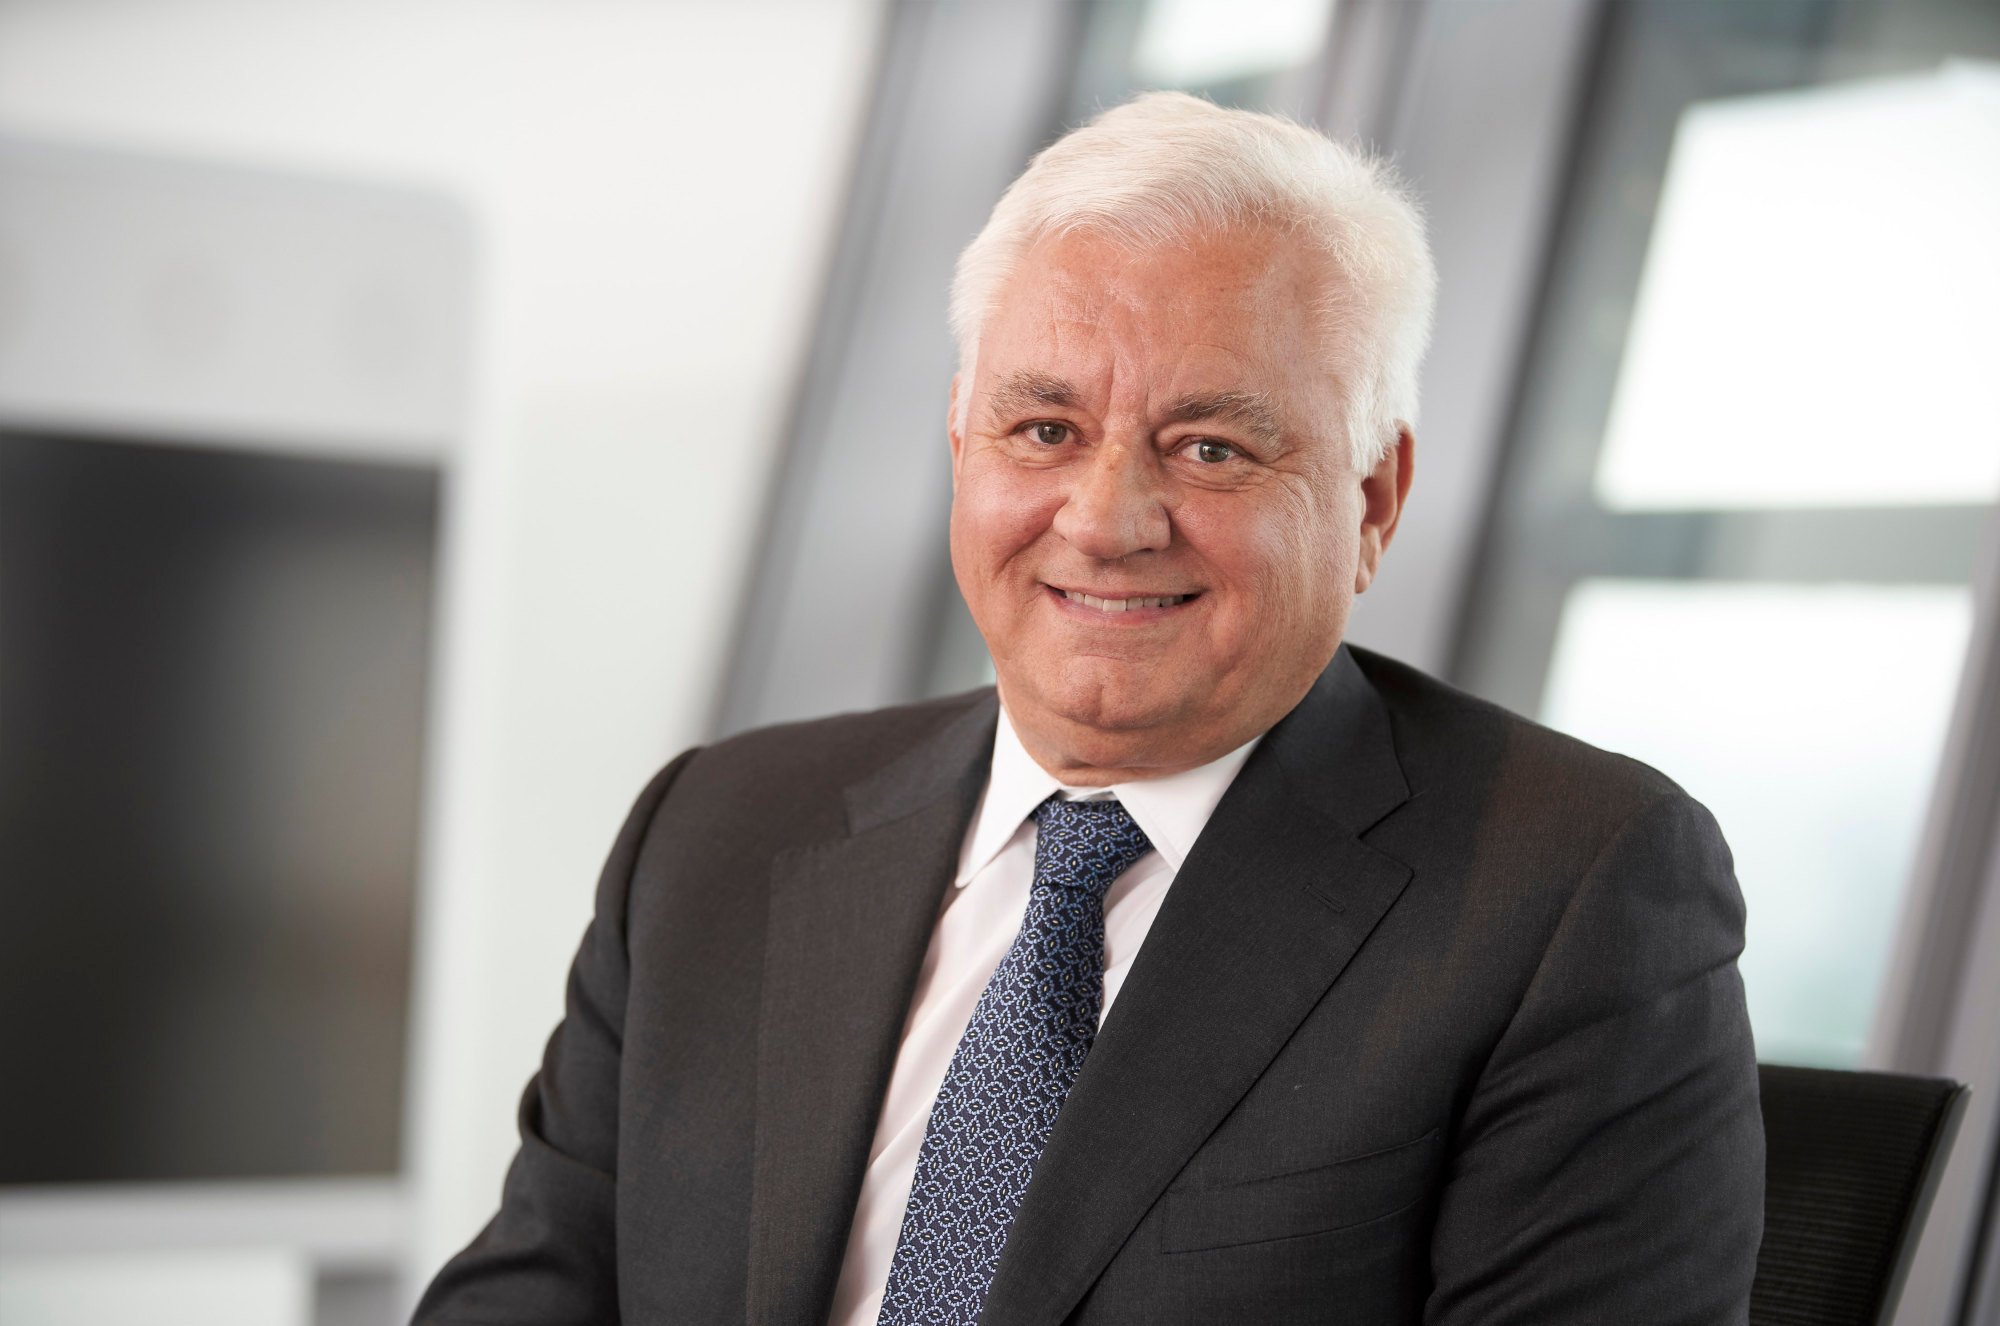 Nigel Knowles, CEO of DWF Group. Photo: Handout